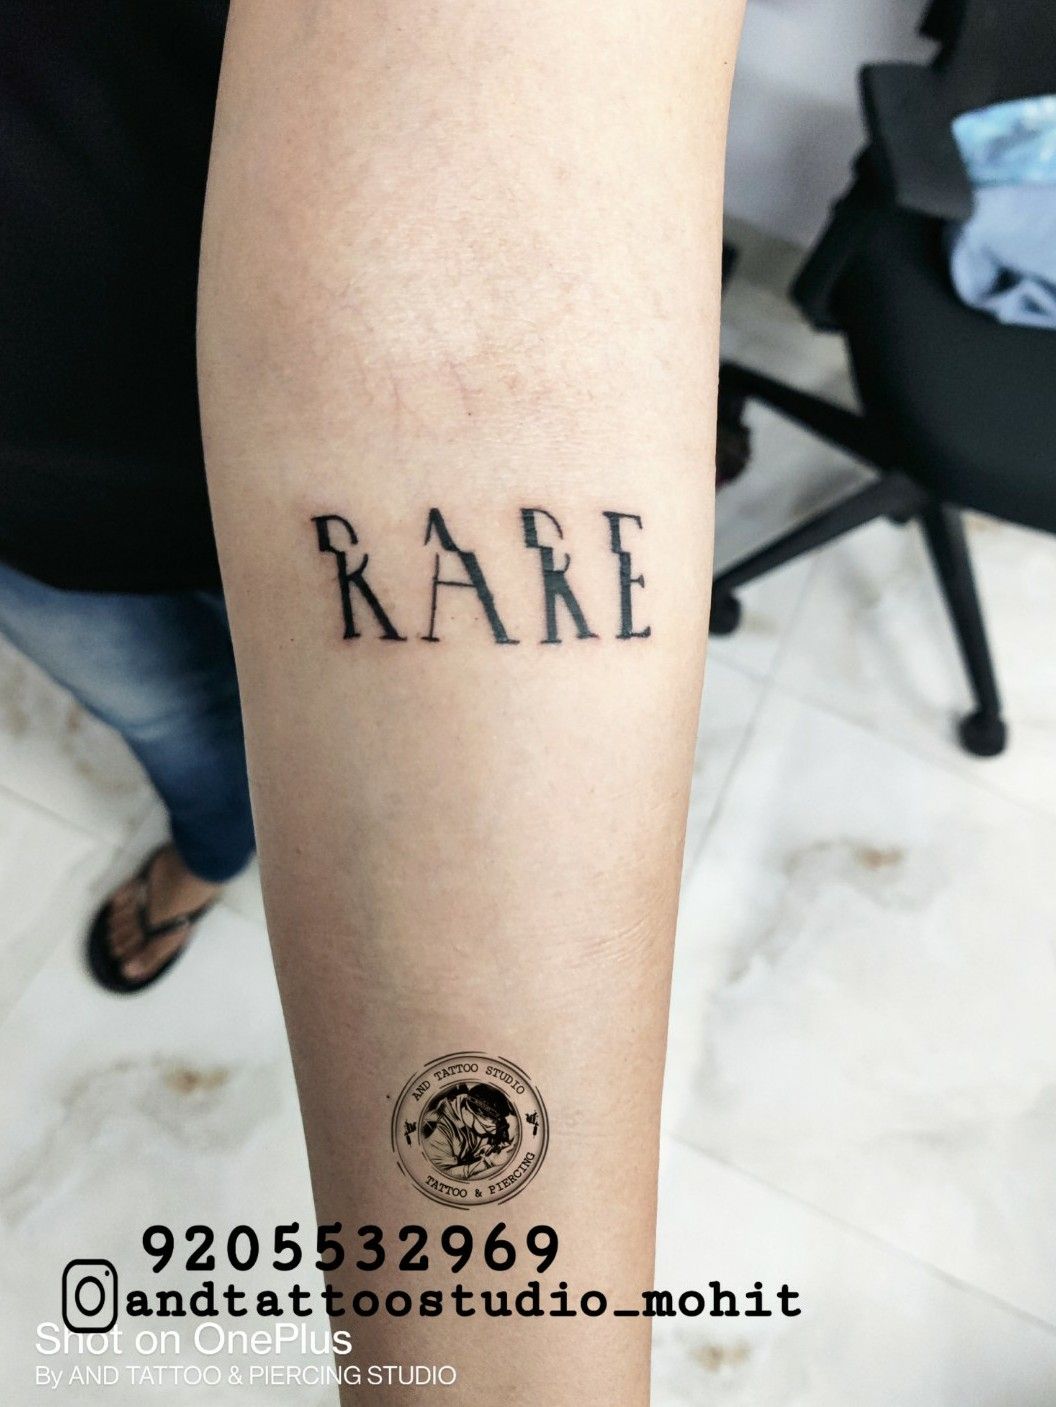 T4 tattoos  one tattoo with tow name one site renu other site mohit tattoo  done by T4 tattoos Lucknow  for appointment  call  whats app me on this  number 